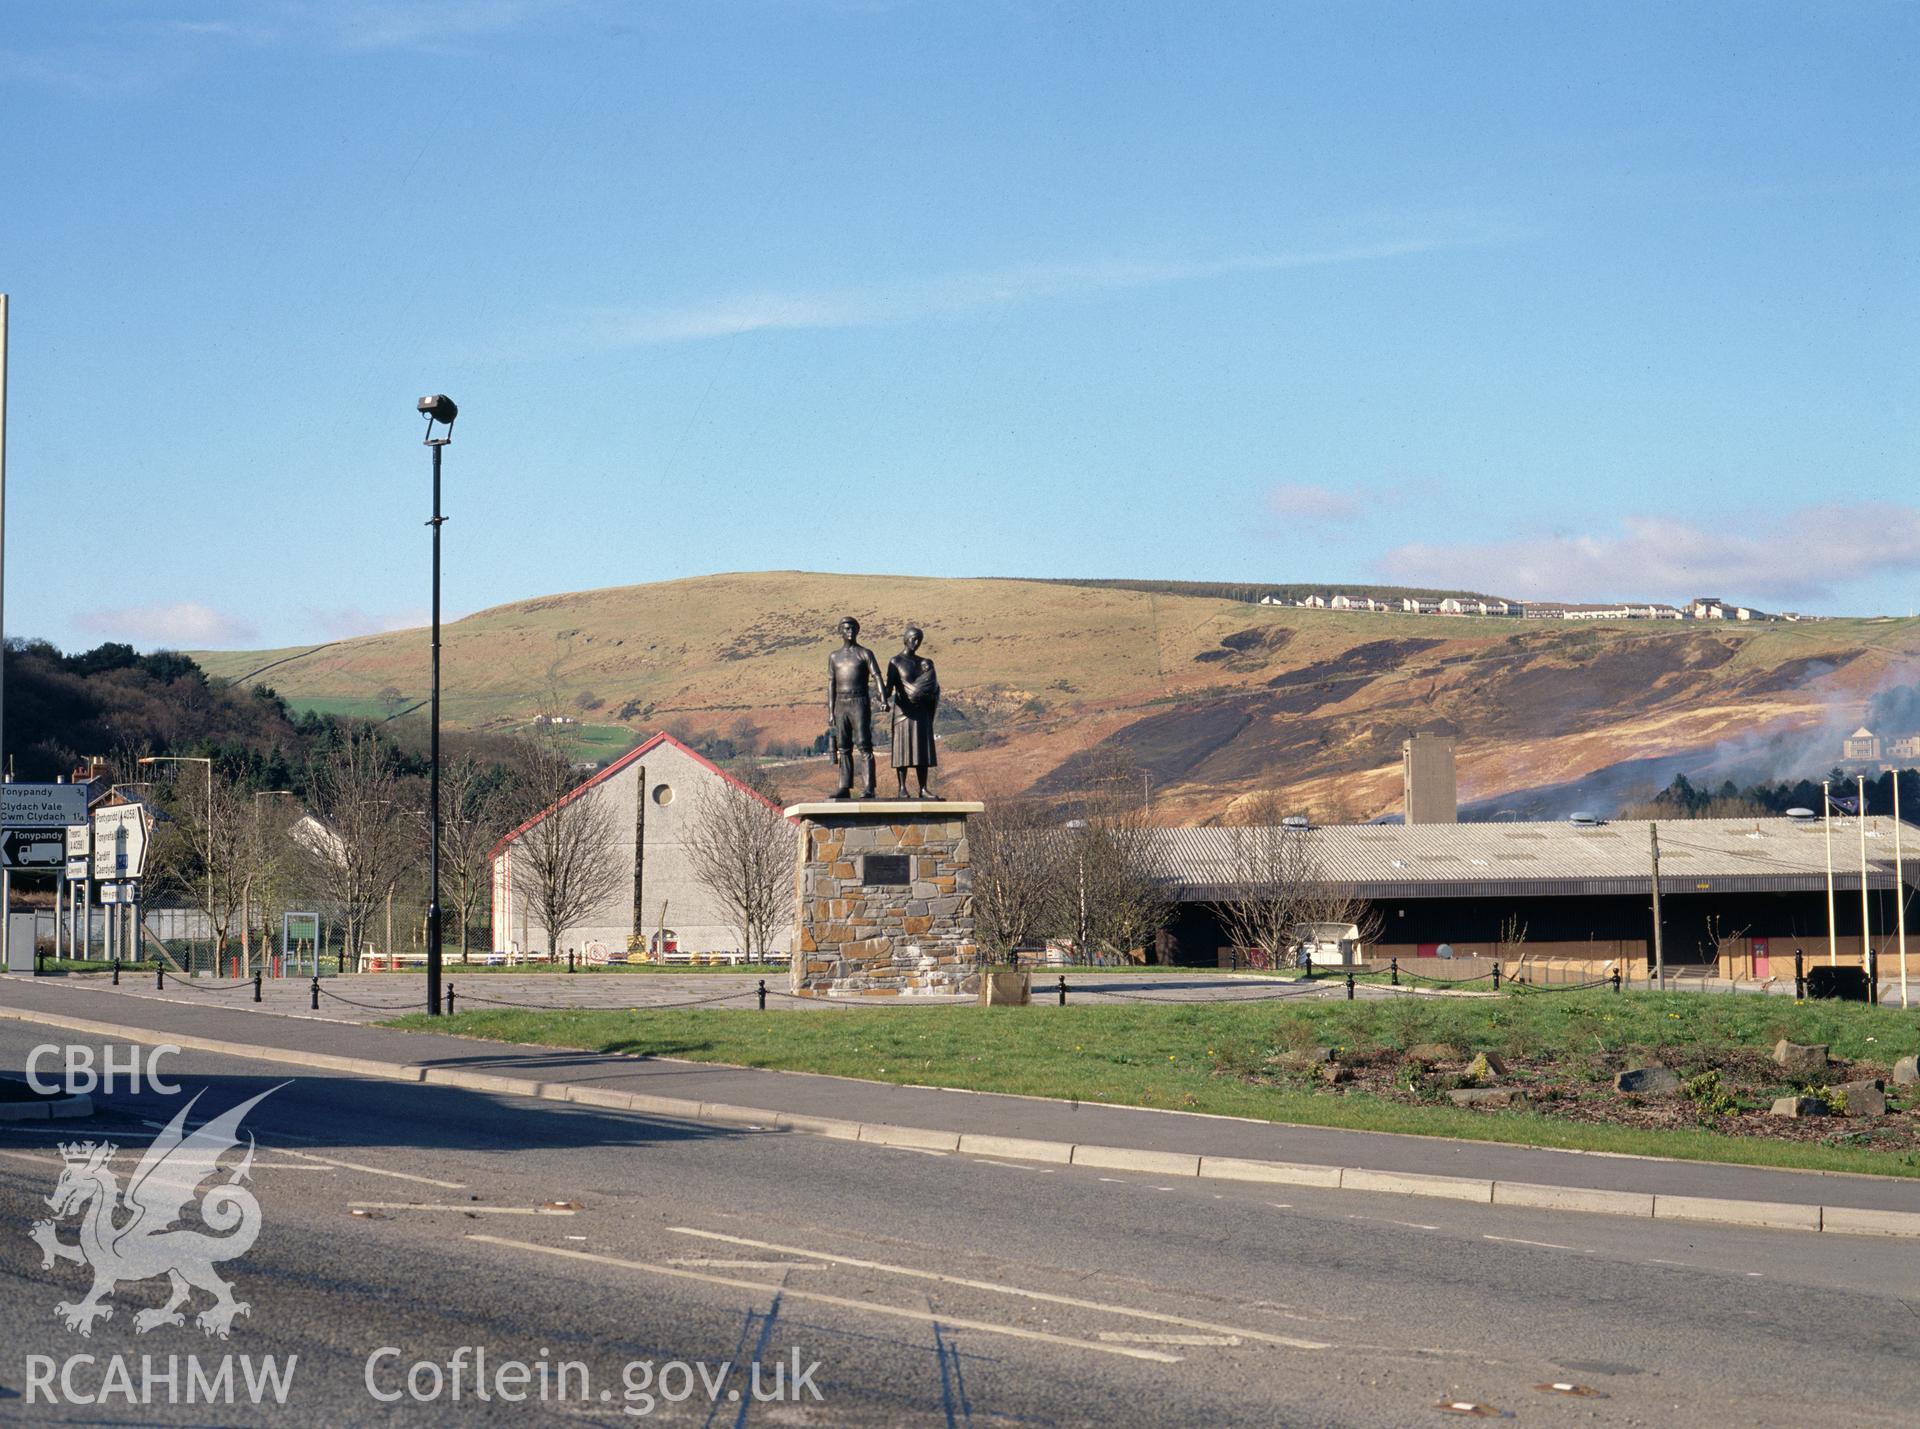 Digital copy of a colour transparency showing sculpture of a man, woman and baby at Llwynypia.